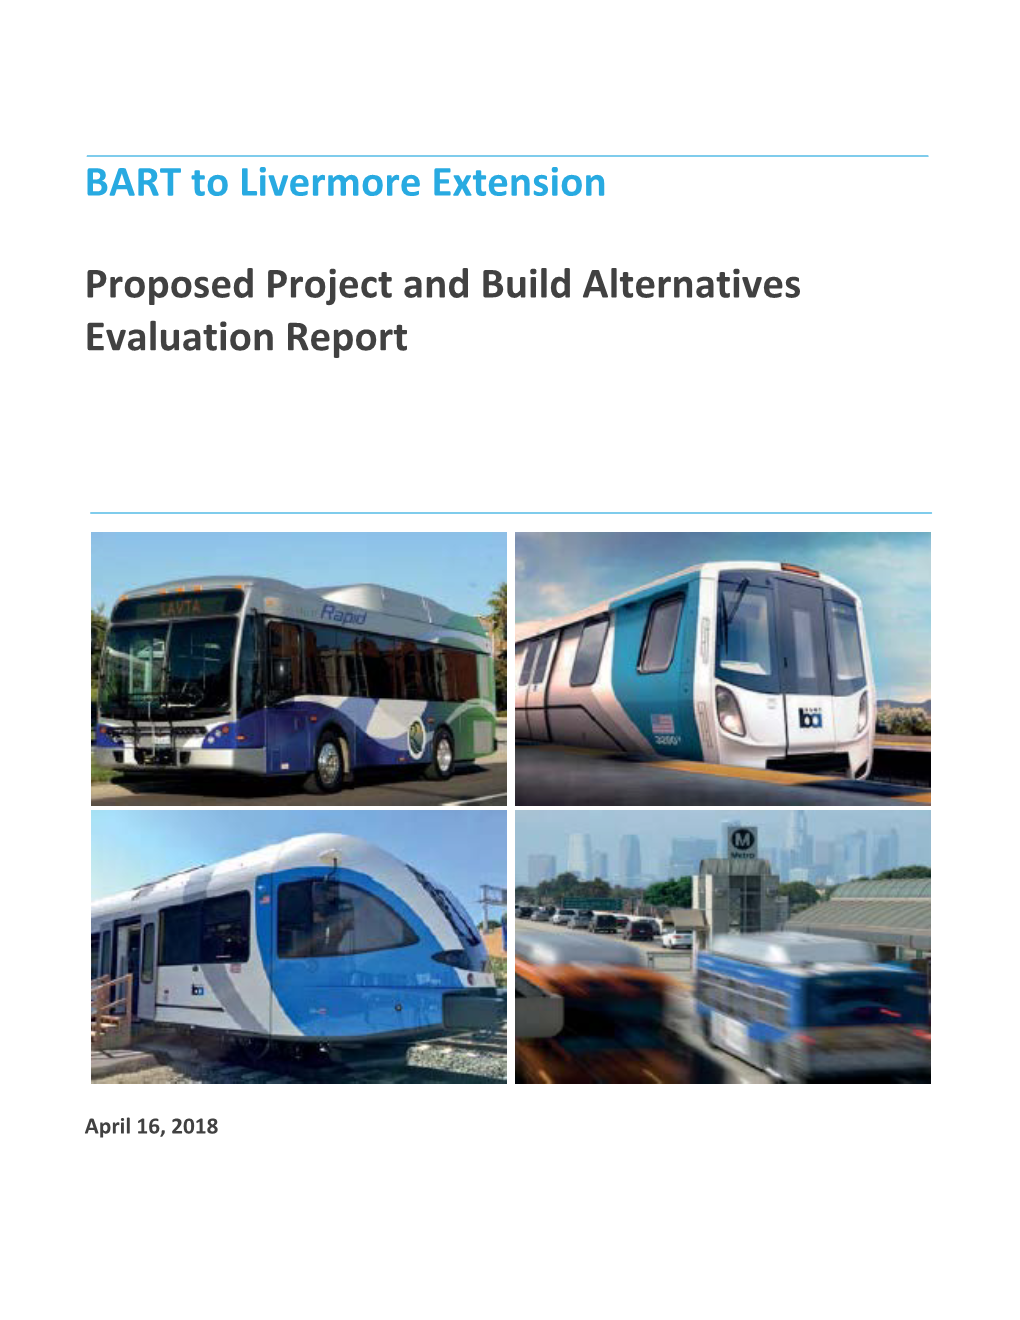 BART to Livermore Extension Proposed Project and Build Alternatives Evaluation Report